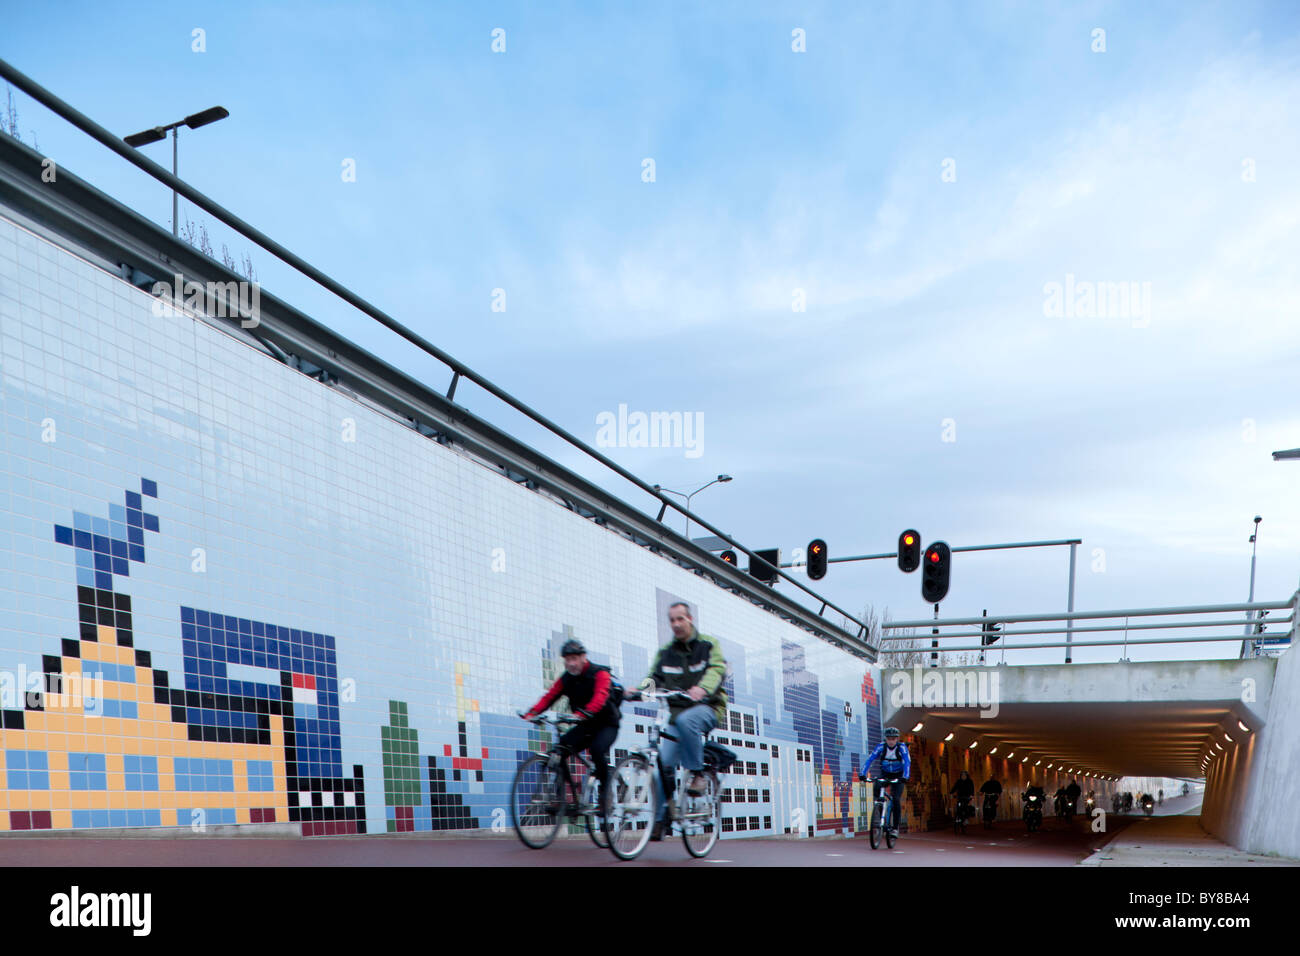 Zaandam, Holland. The so-called Pixel Poort  Bicycle Tunnel. Connecting Amsterdam and Zaandam.  The Netherlands Stock Photo